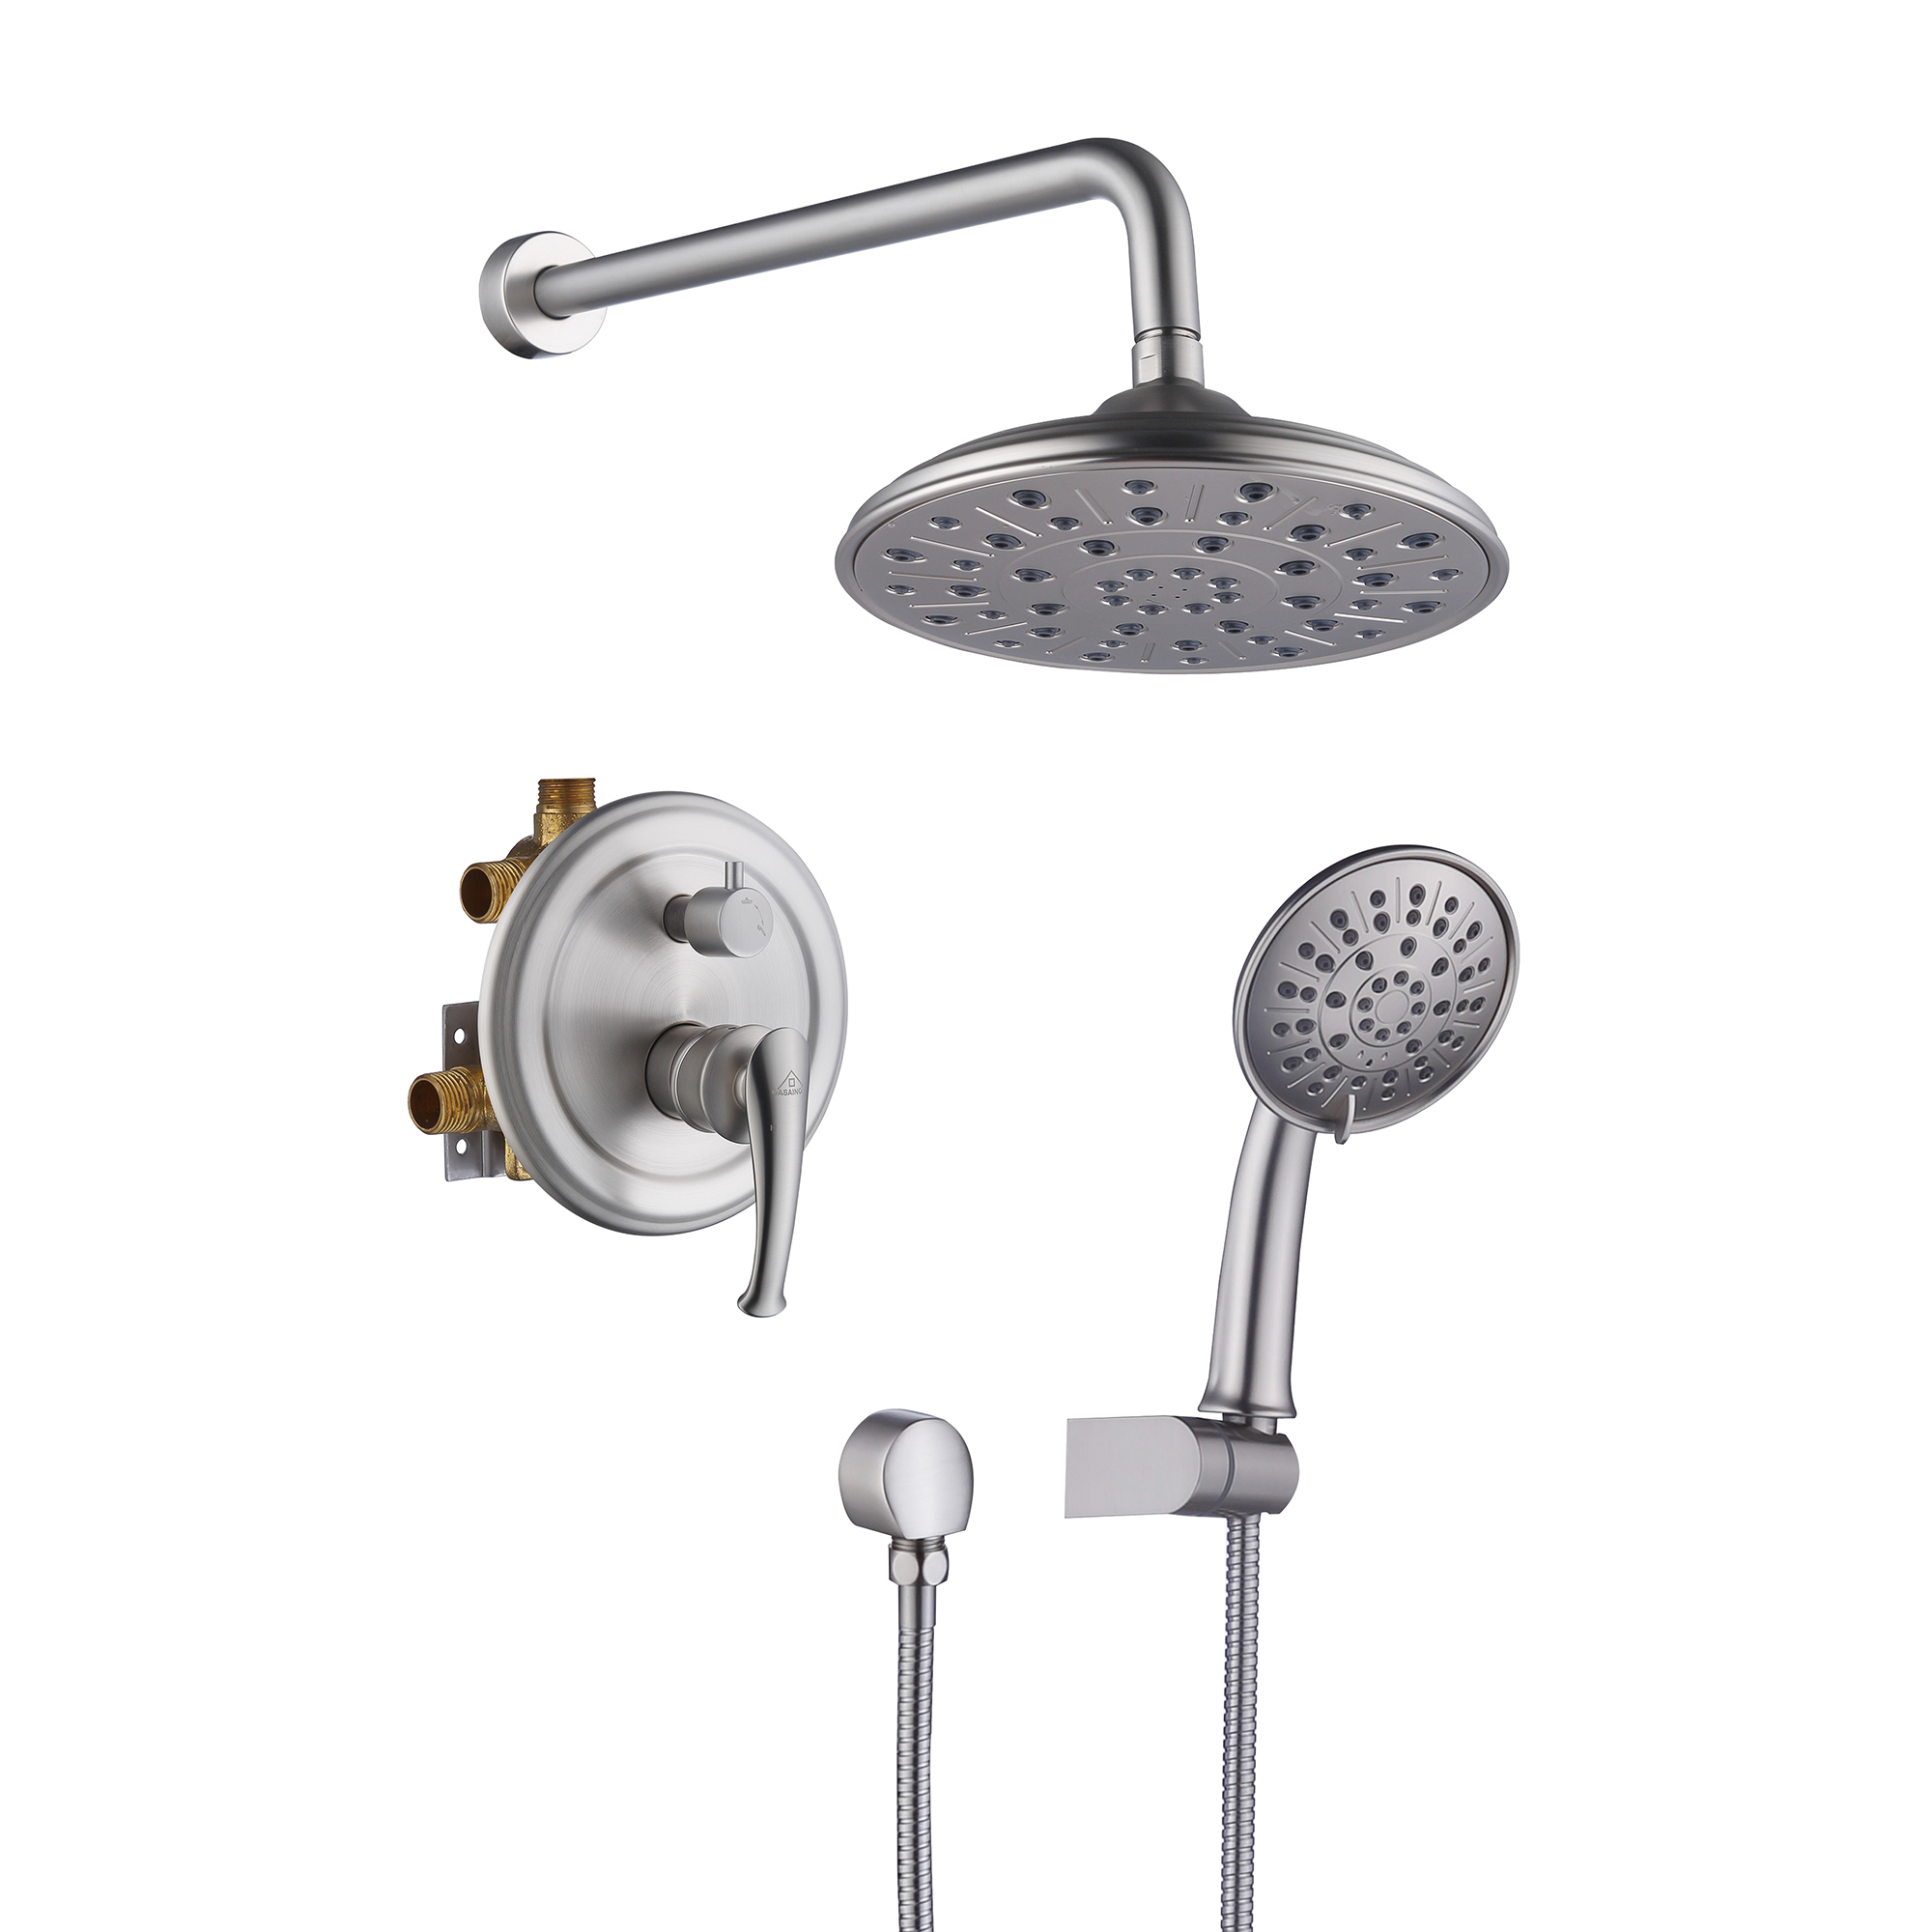 8.3inch Wall-mounted rain shower faucet with pressure balanced valve-CASAINC